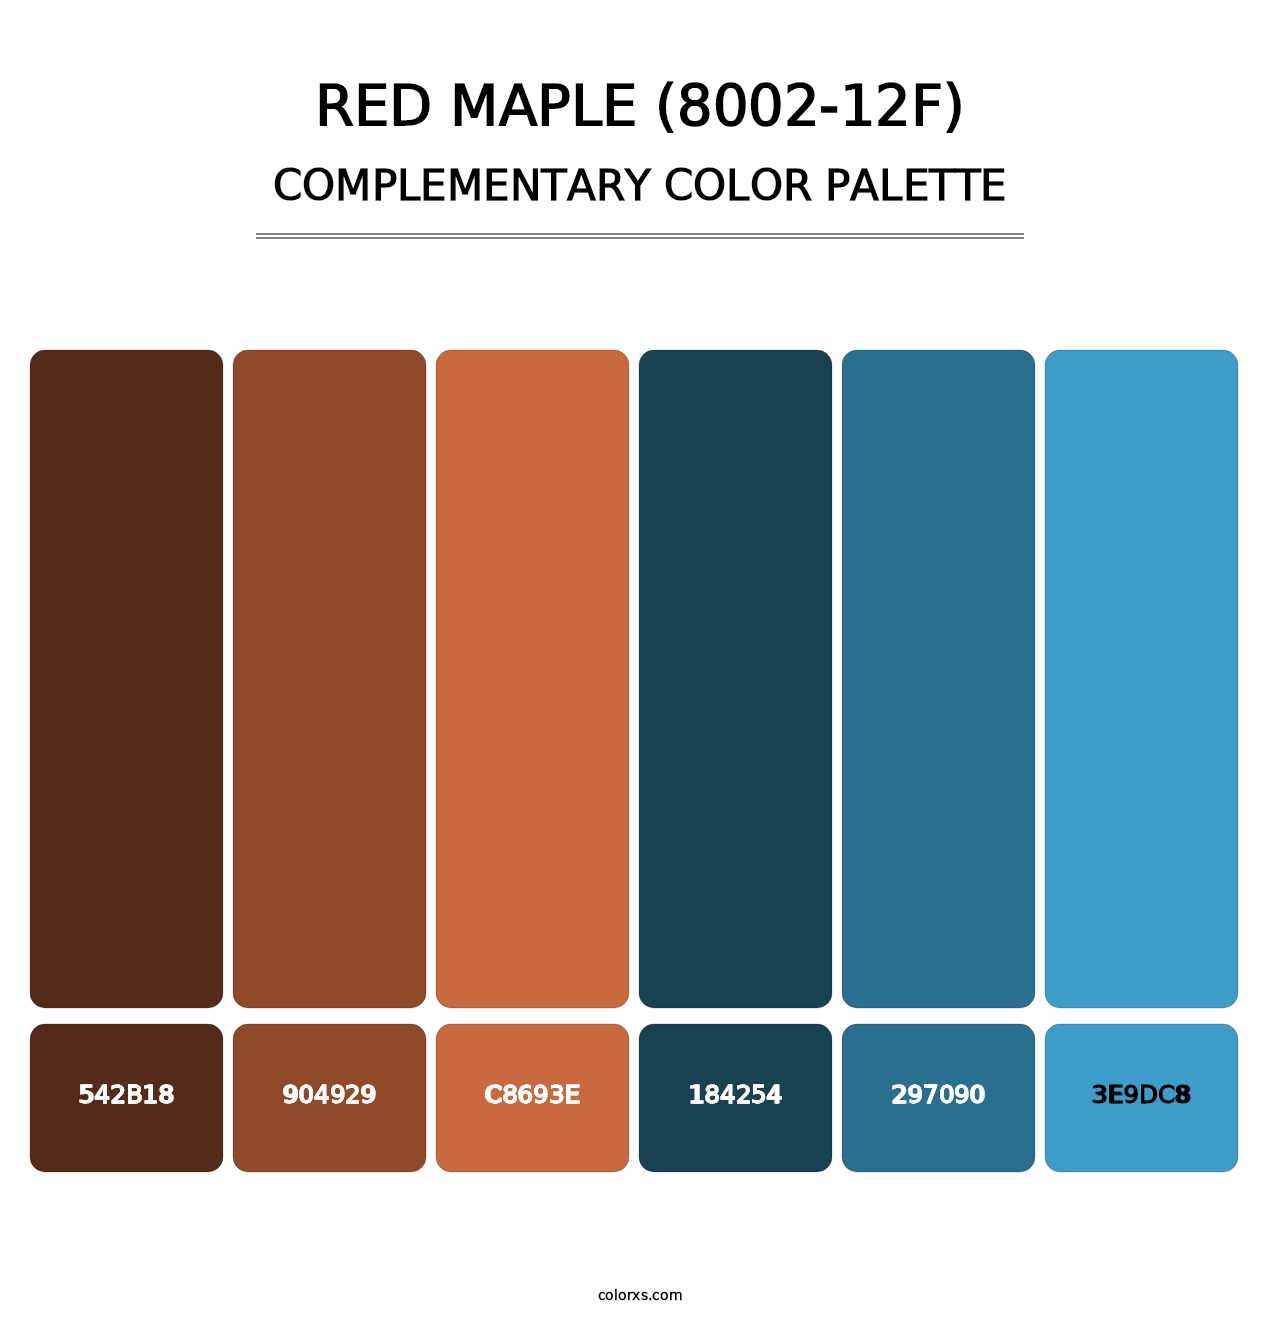 Red Maple (8002-12F) - Complementary Color Palette